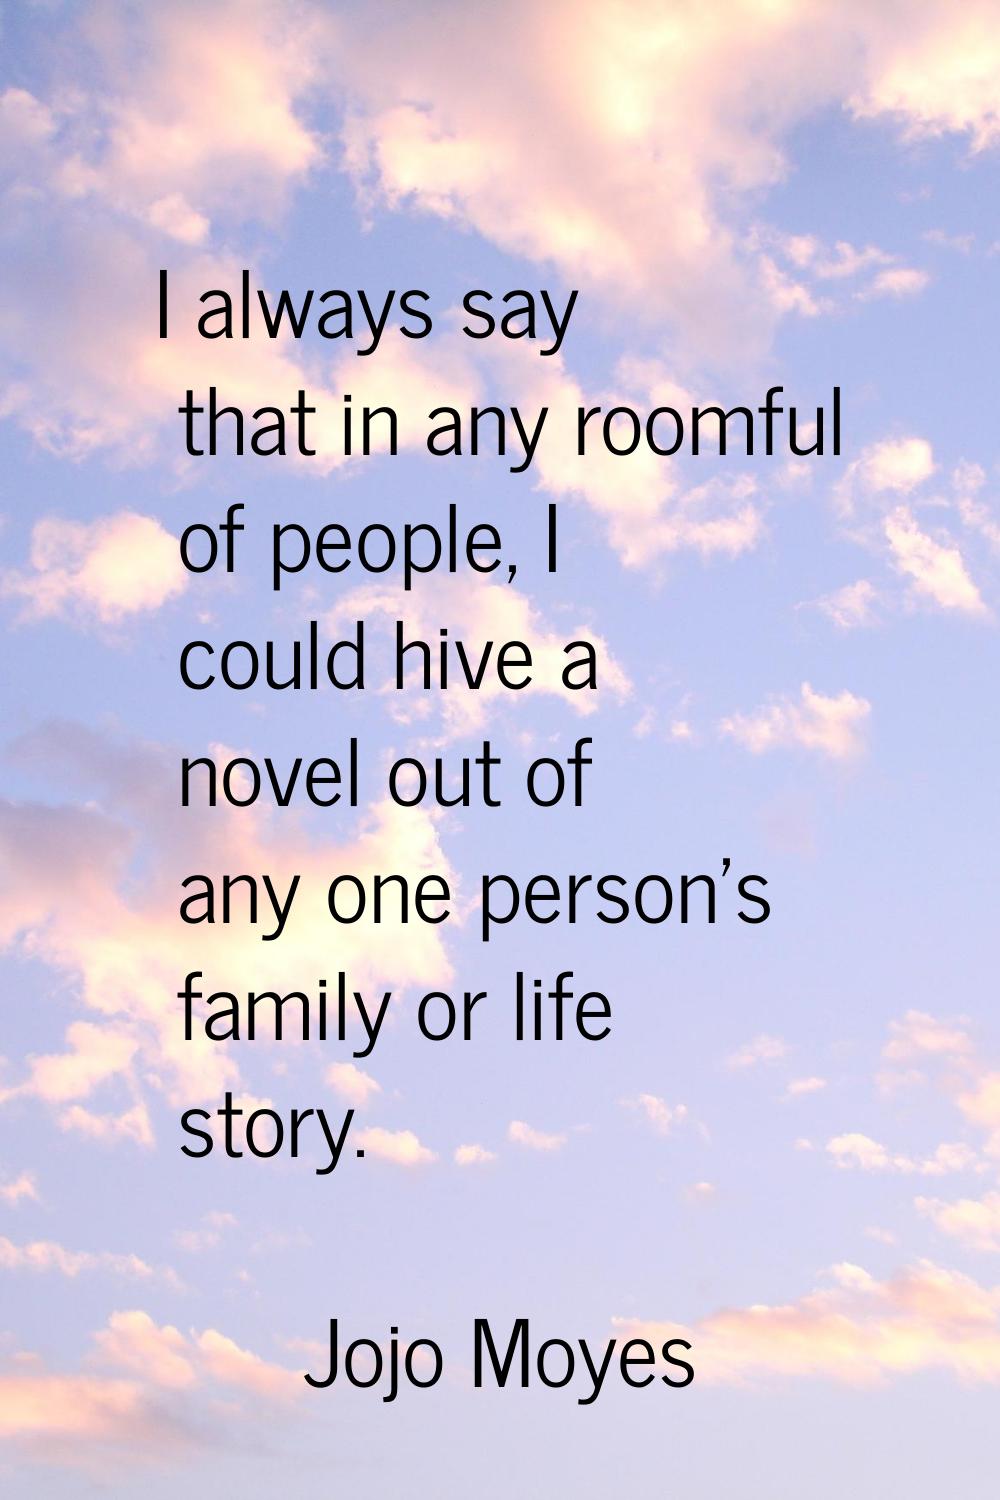 I always say that in any roomful of people, I could hive a novel out of any one person's family or 